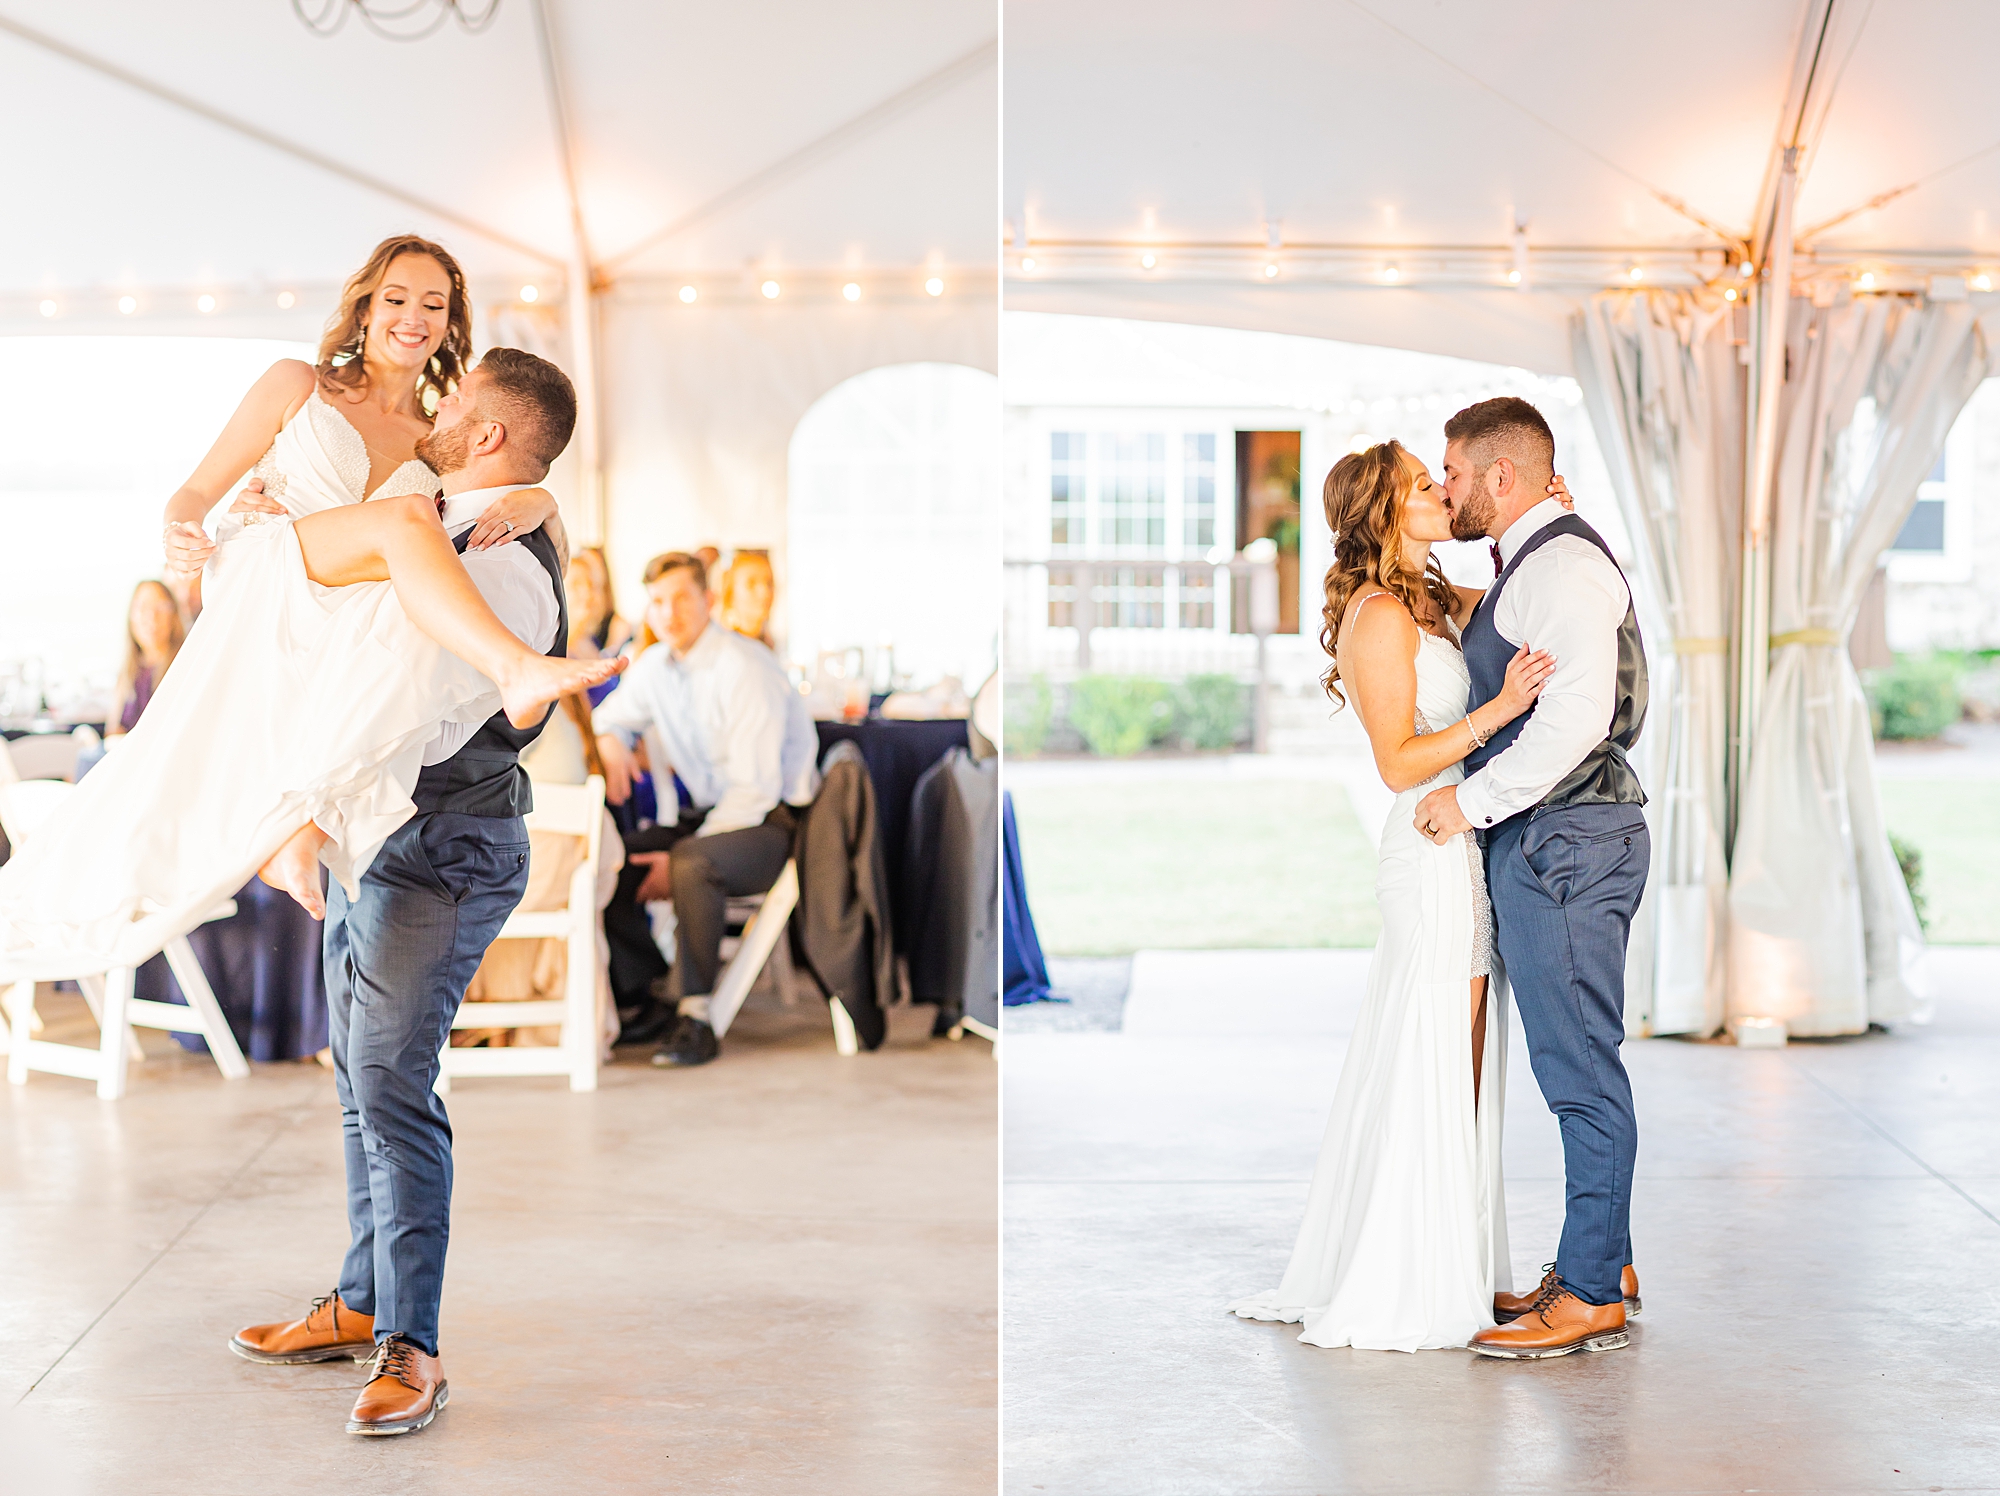 groom lifts bride up during first dance during John's Island wedding reception